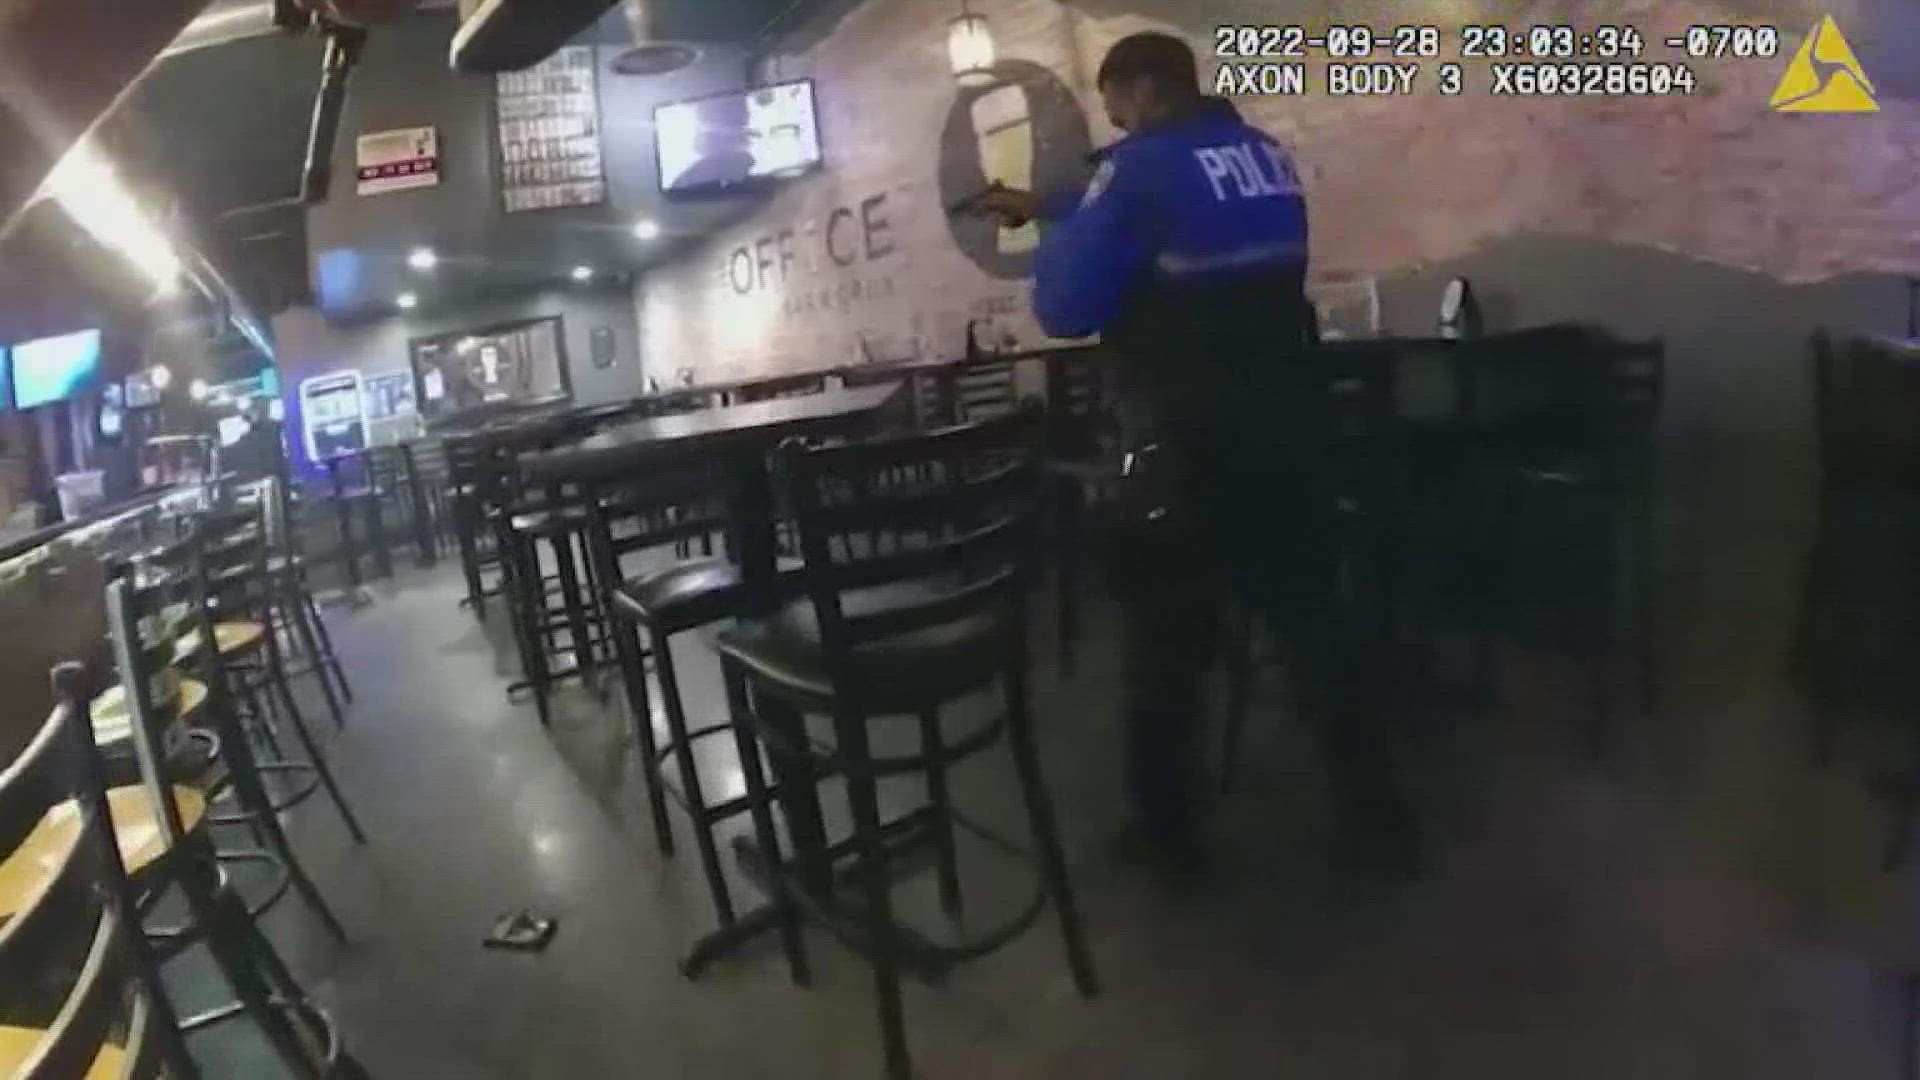 Tacoma police were called after a man threatened staff and customers at a bar with a handgun. No one was injured by the gunfire.